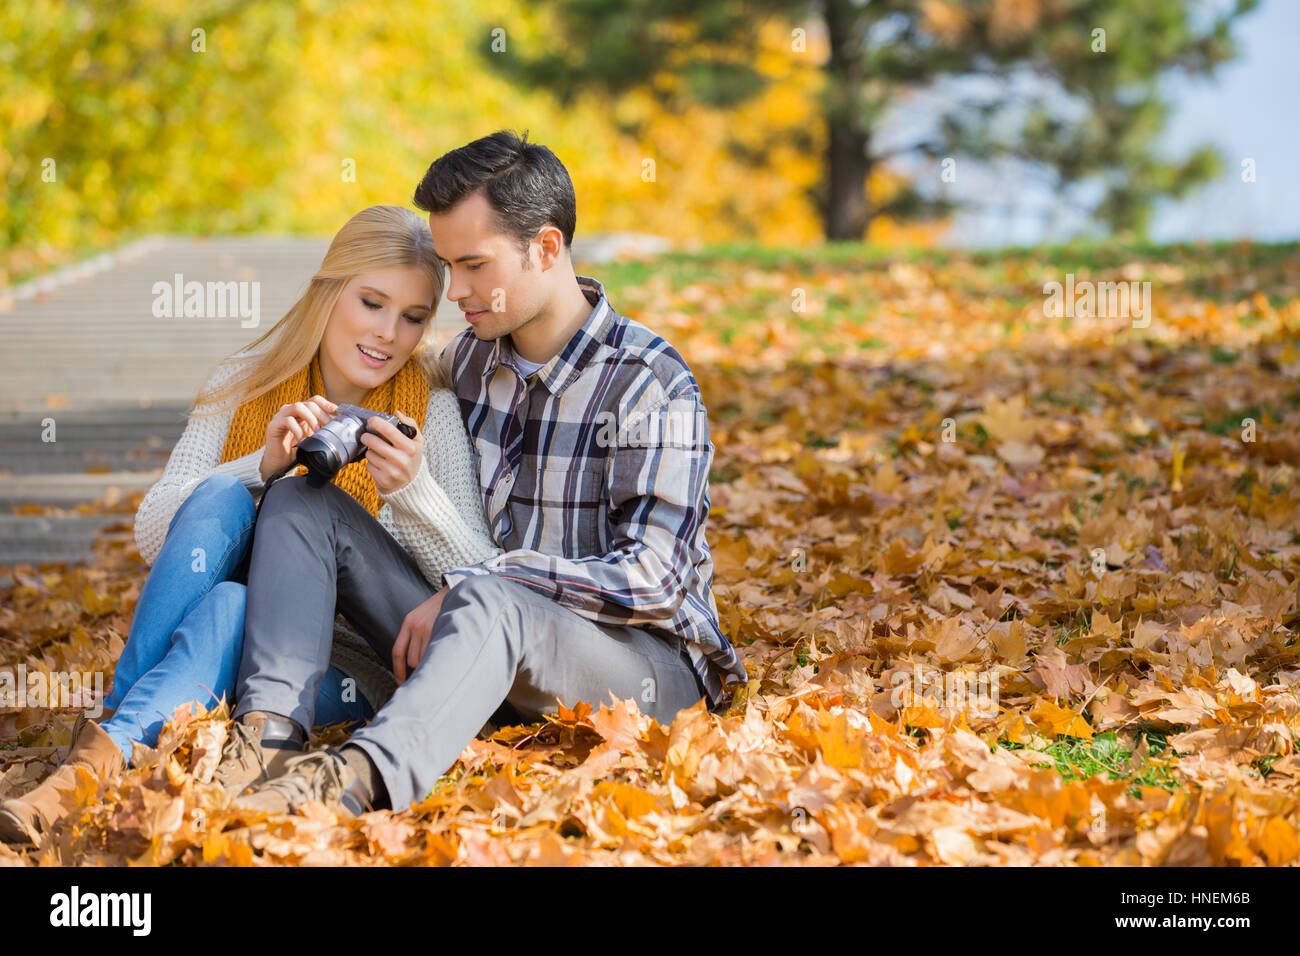 Couple looking at pictures on digital camera in park during autumn Stock Photo